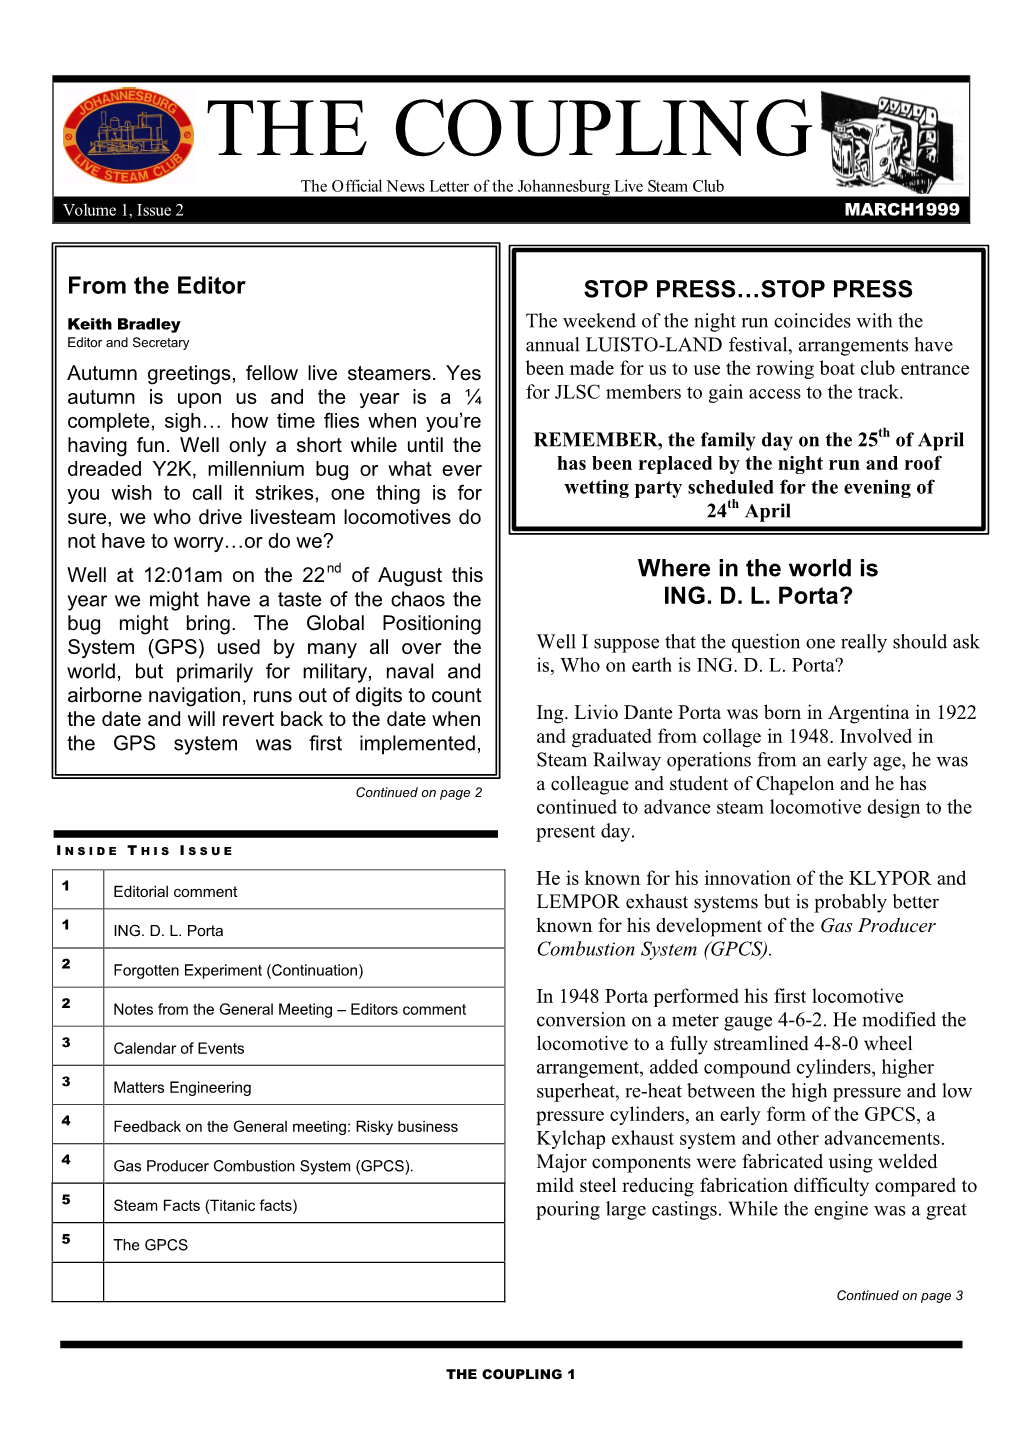 THE COUPLING the Official News Letter of the Johannesburg Live Steam Club Volume 1, Issue 2 MARCH1999